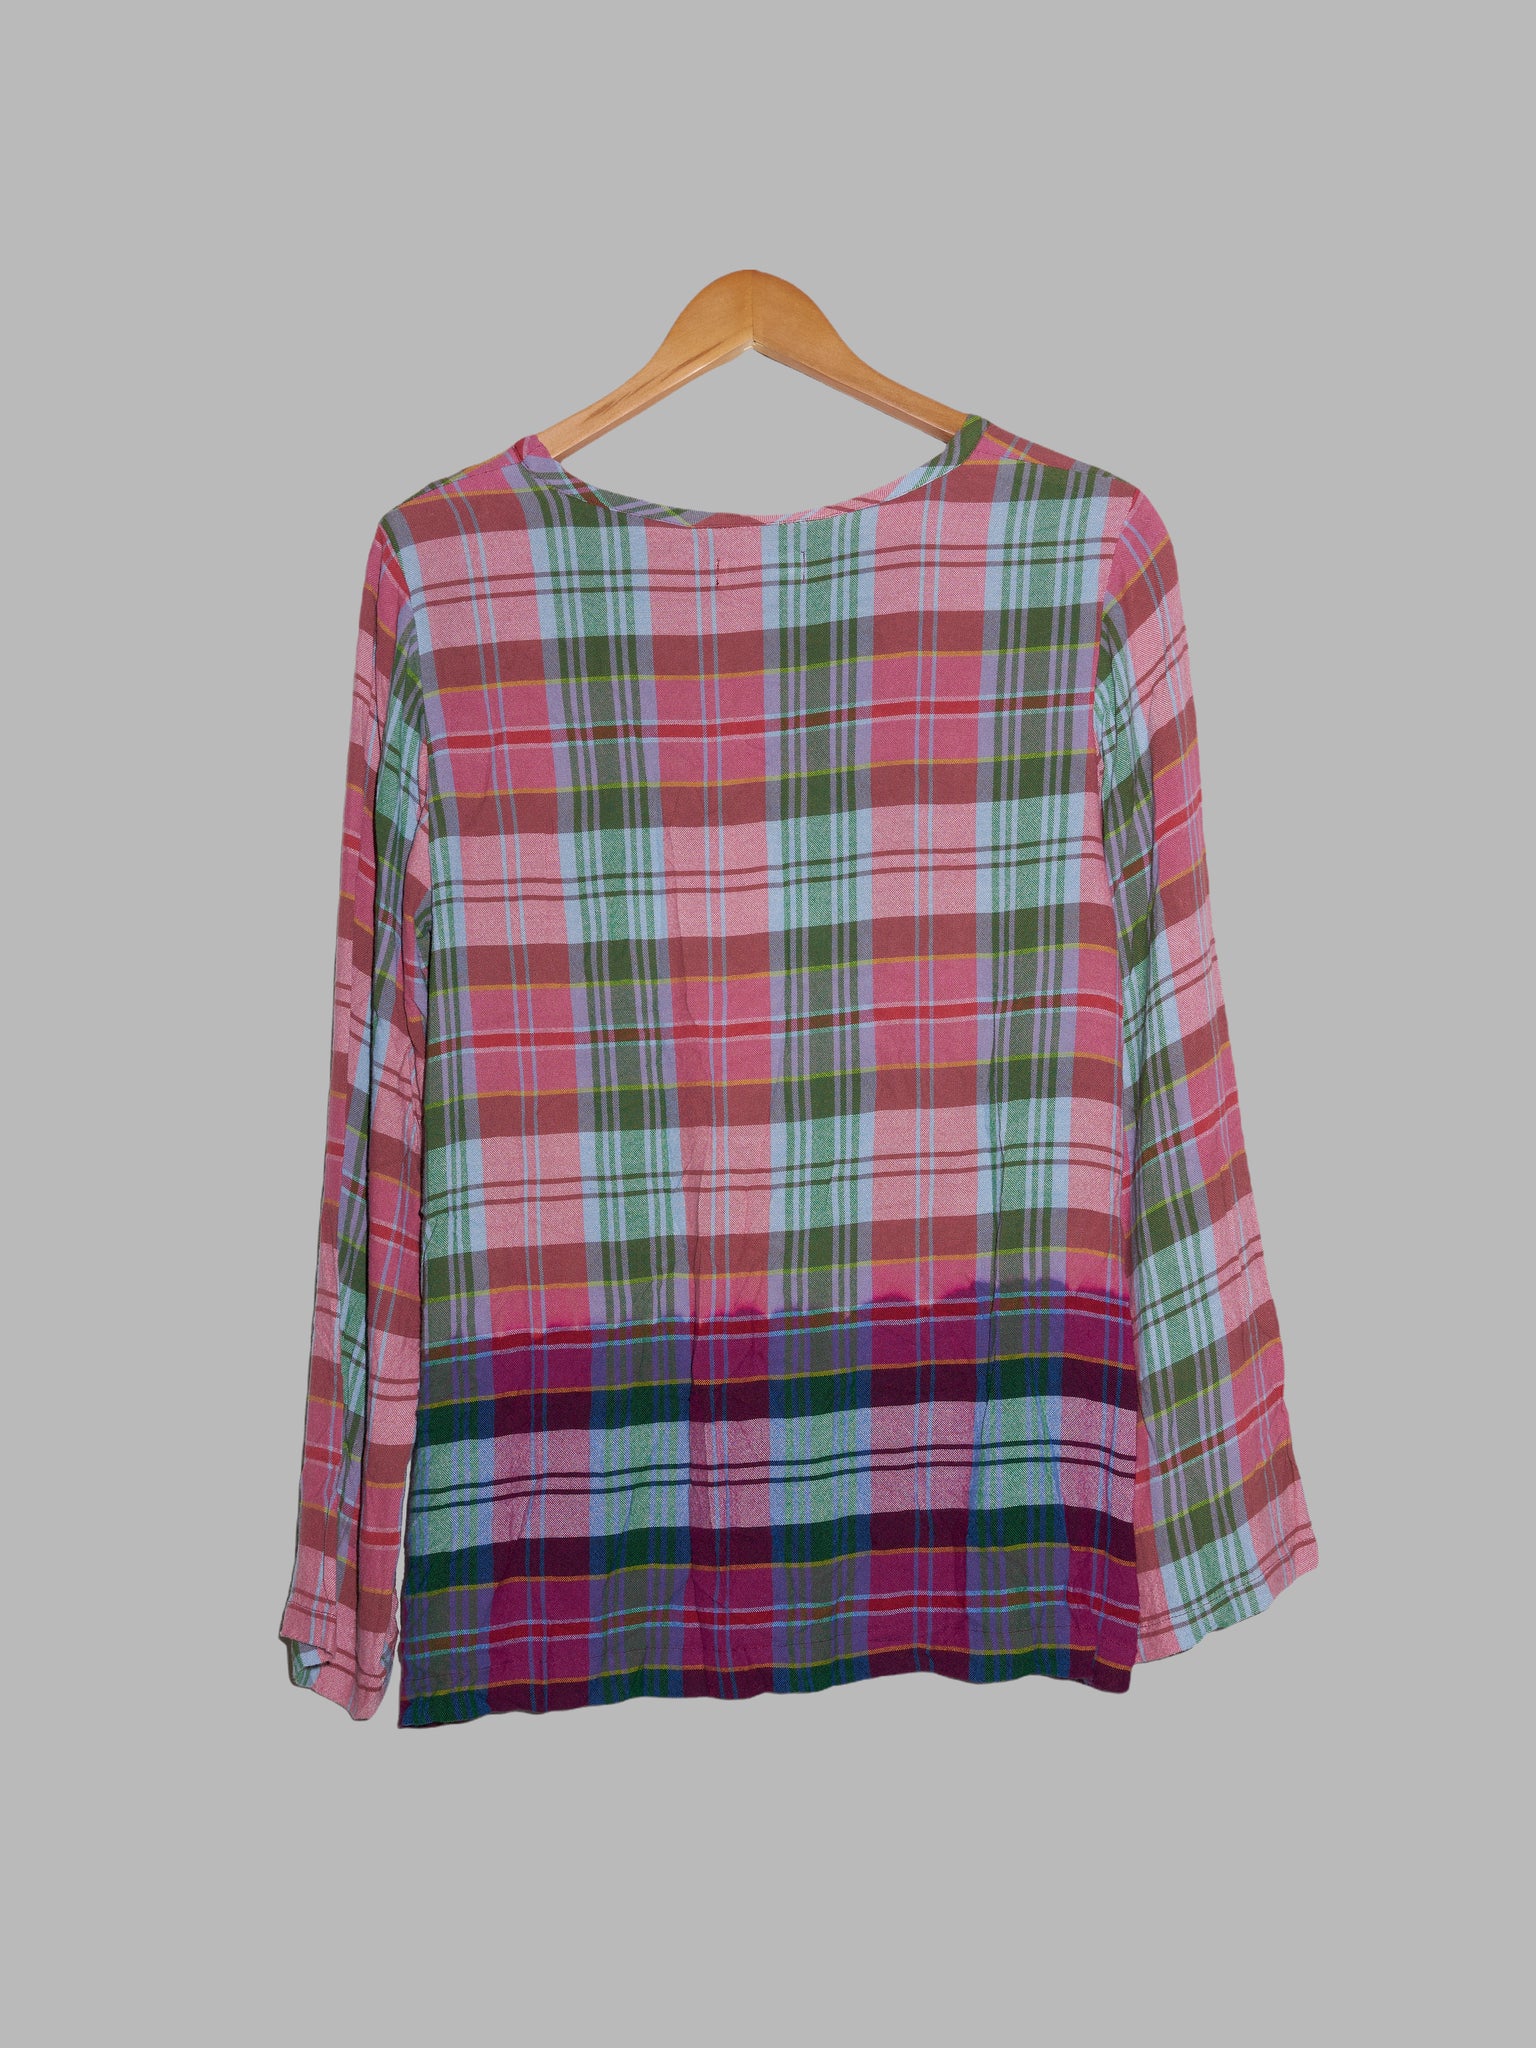 Robe de Chambre Comme des Garcons AW1993 creased rayon plaid long sleeve top